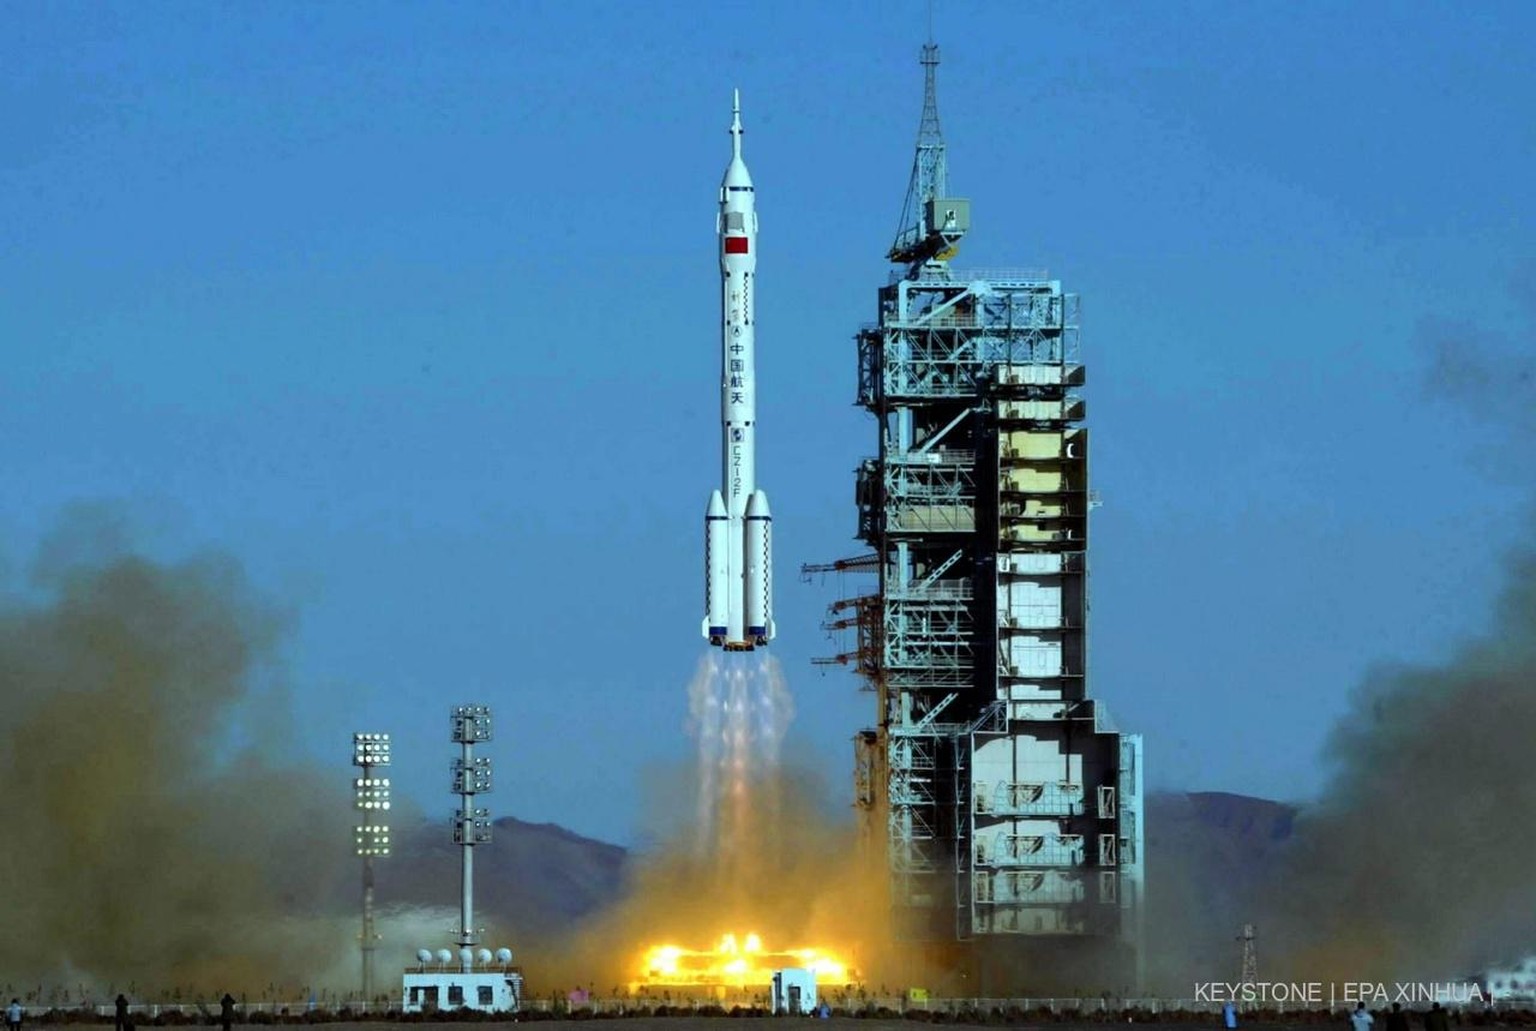 The Long March 2F rocket with Shenzhou V capsule carrying 38 year old Yang Liwei, the first Chinese to go into space, takes off from a desert launch pad in the Inner Mongolian autonomous region in wes ...